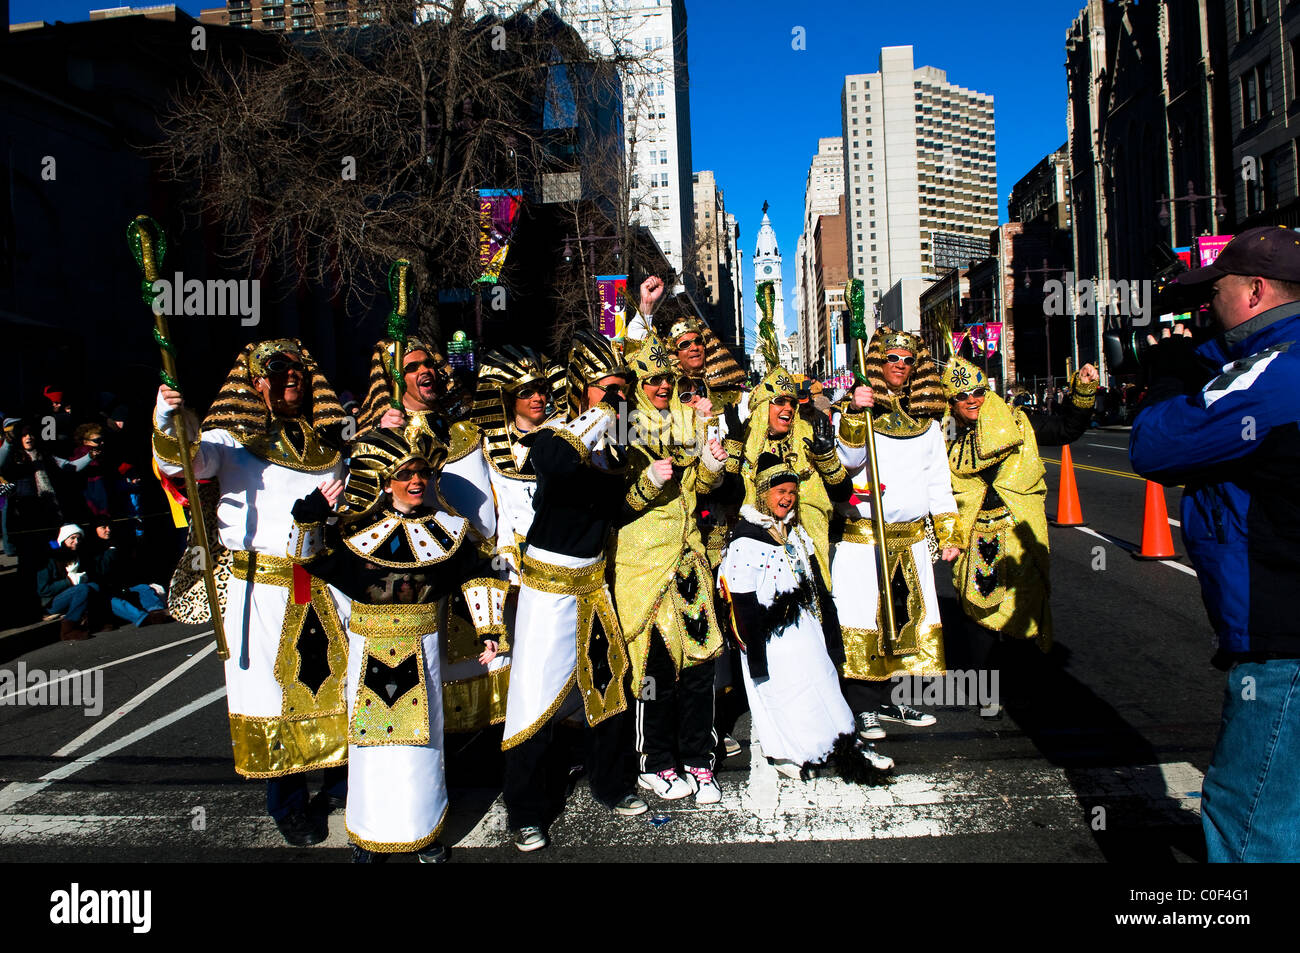 The colorful Mummers parade in Philadelphia, USA. Stock Photo